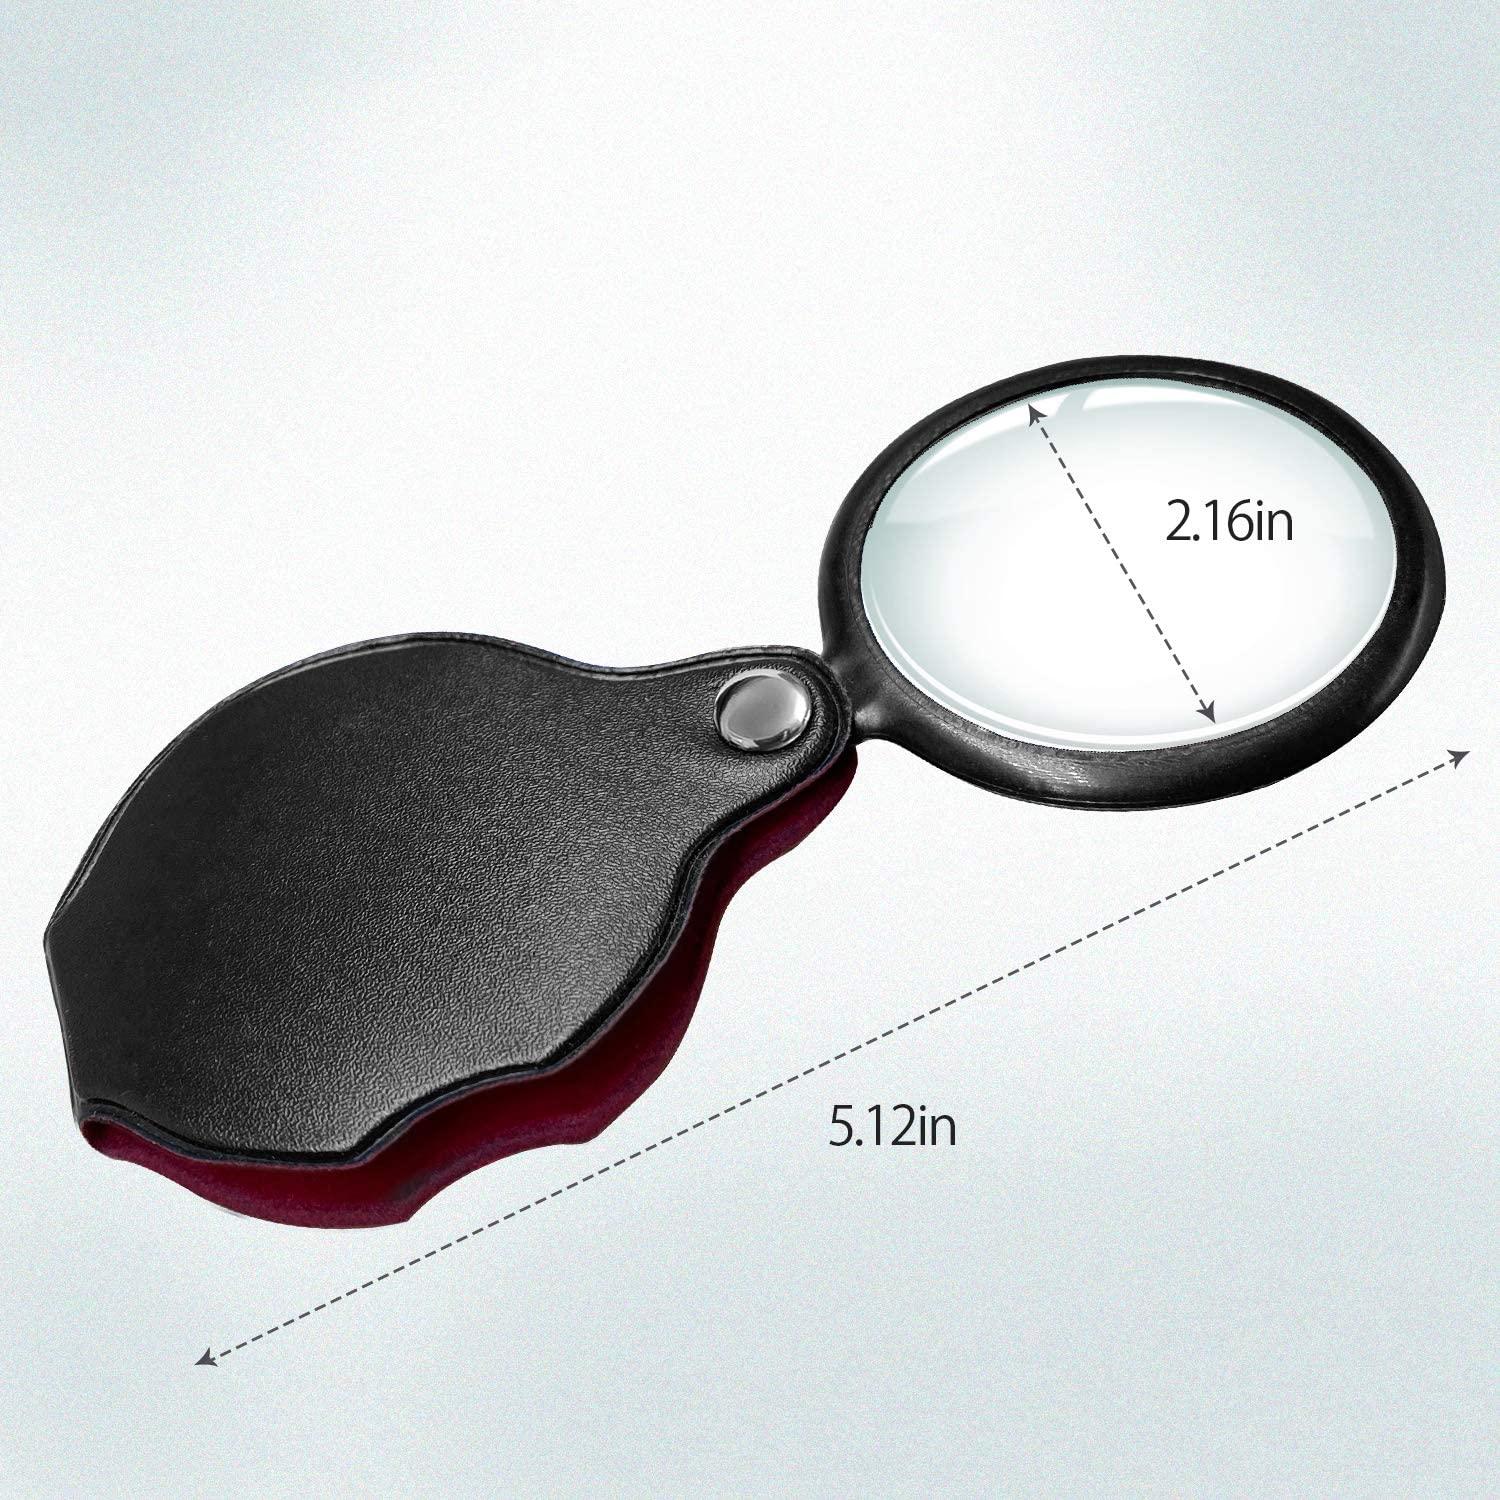 Wapodeai 2pcs 10x Small Pocket Magnify Glass Premium Folding Mini  Magnifying Glass with Rotating Protective Sheath Apply to Reading Science  Jewelry Hobbies Books 1.96in